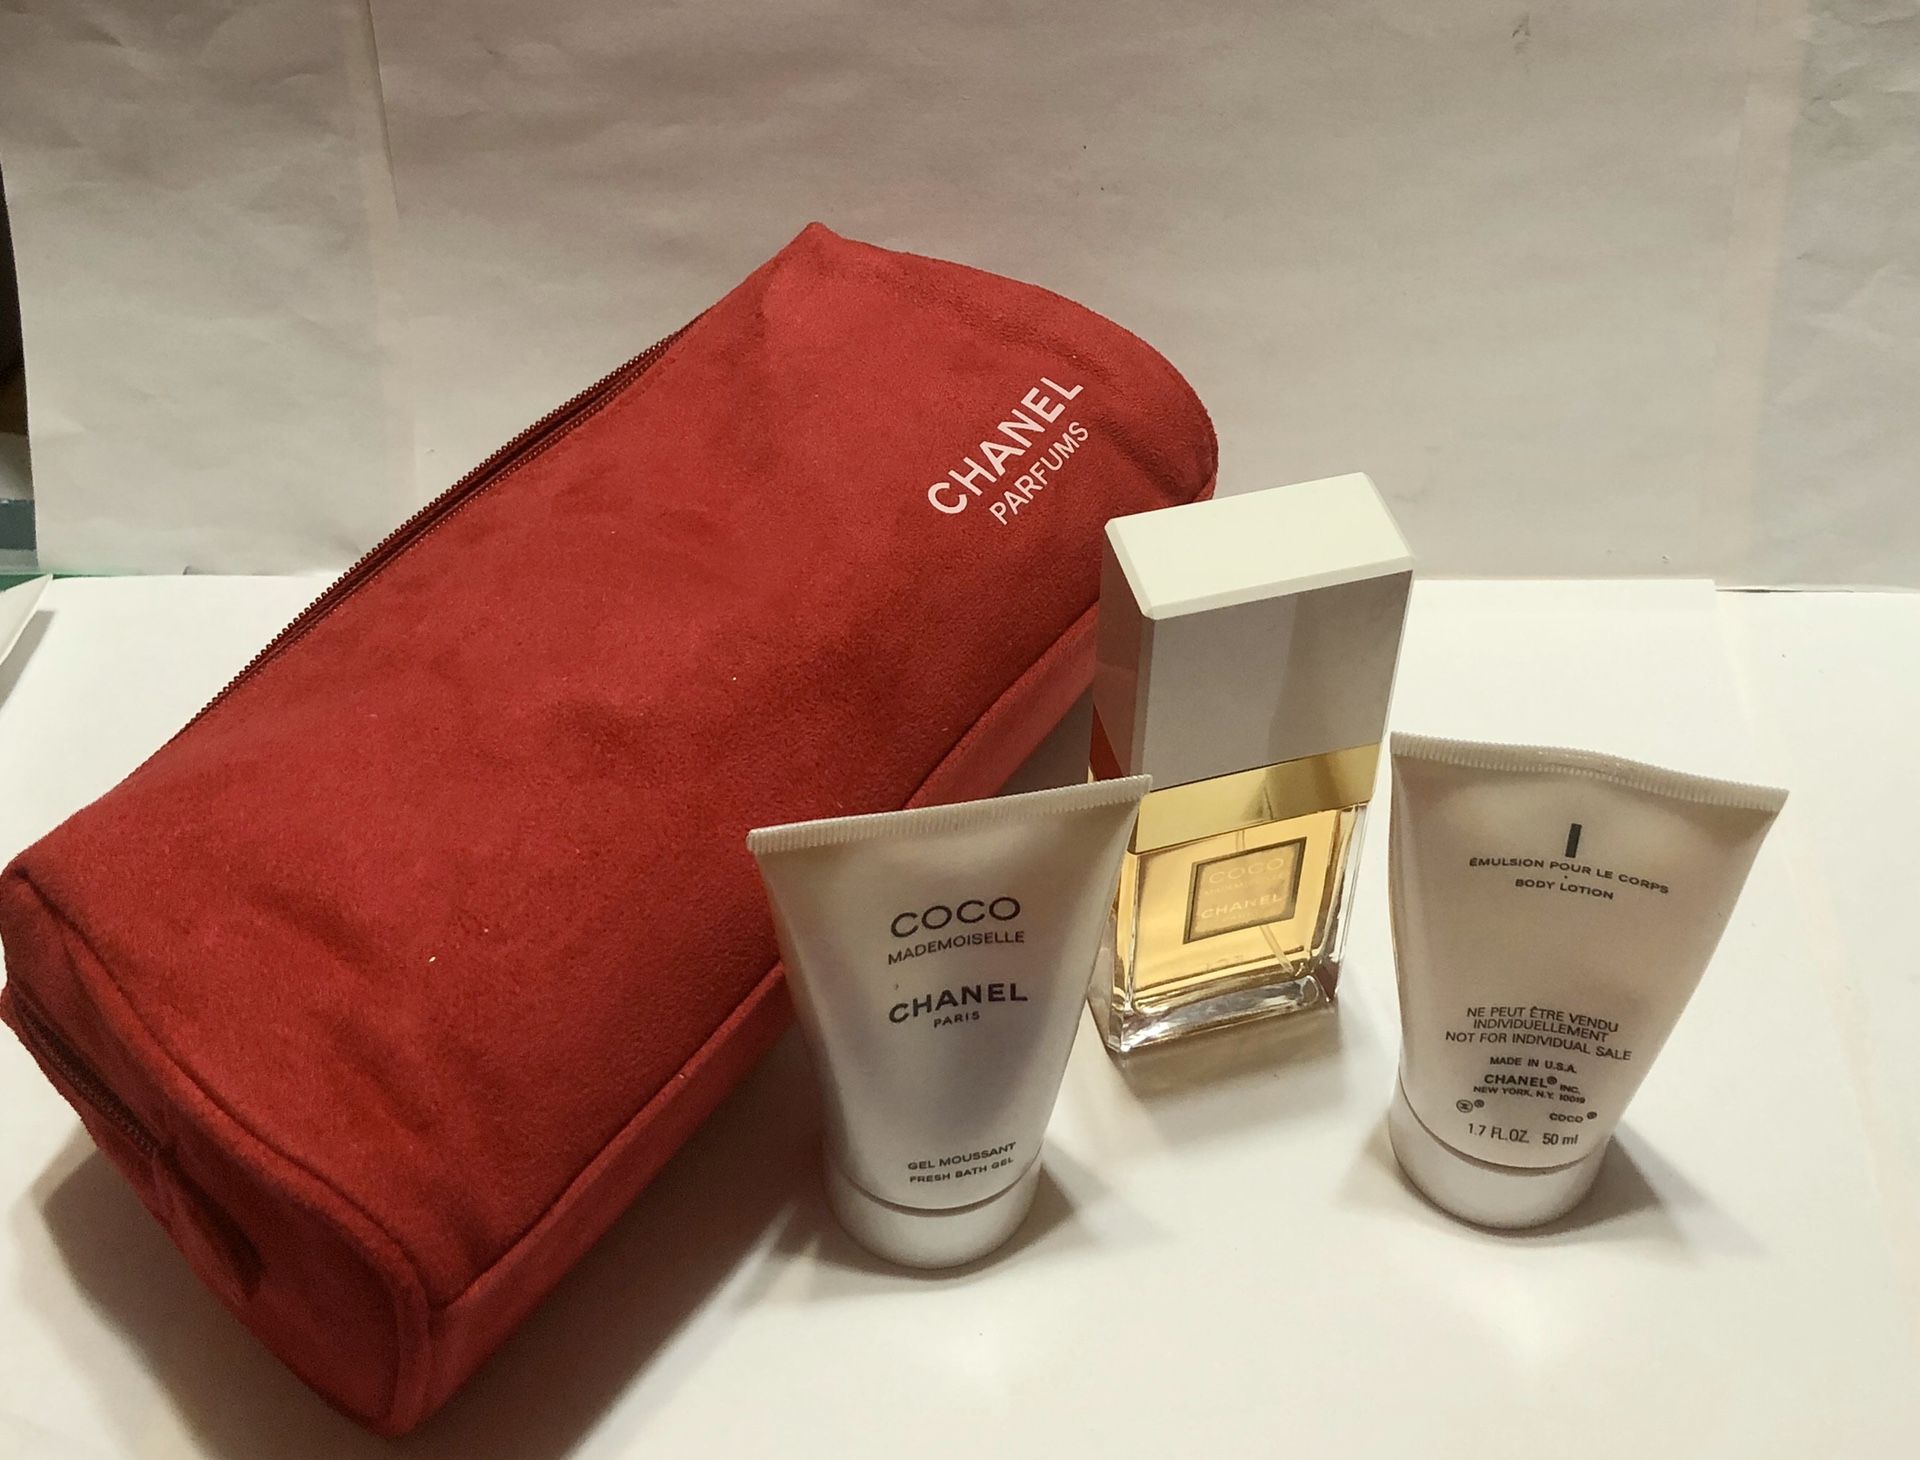 CHANEL COCO MADEMOISELLE 4PC GIFT SET